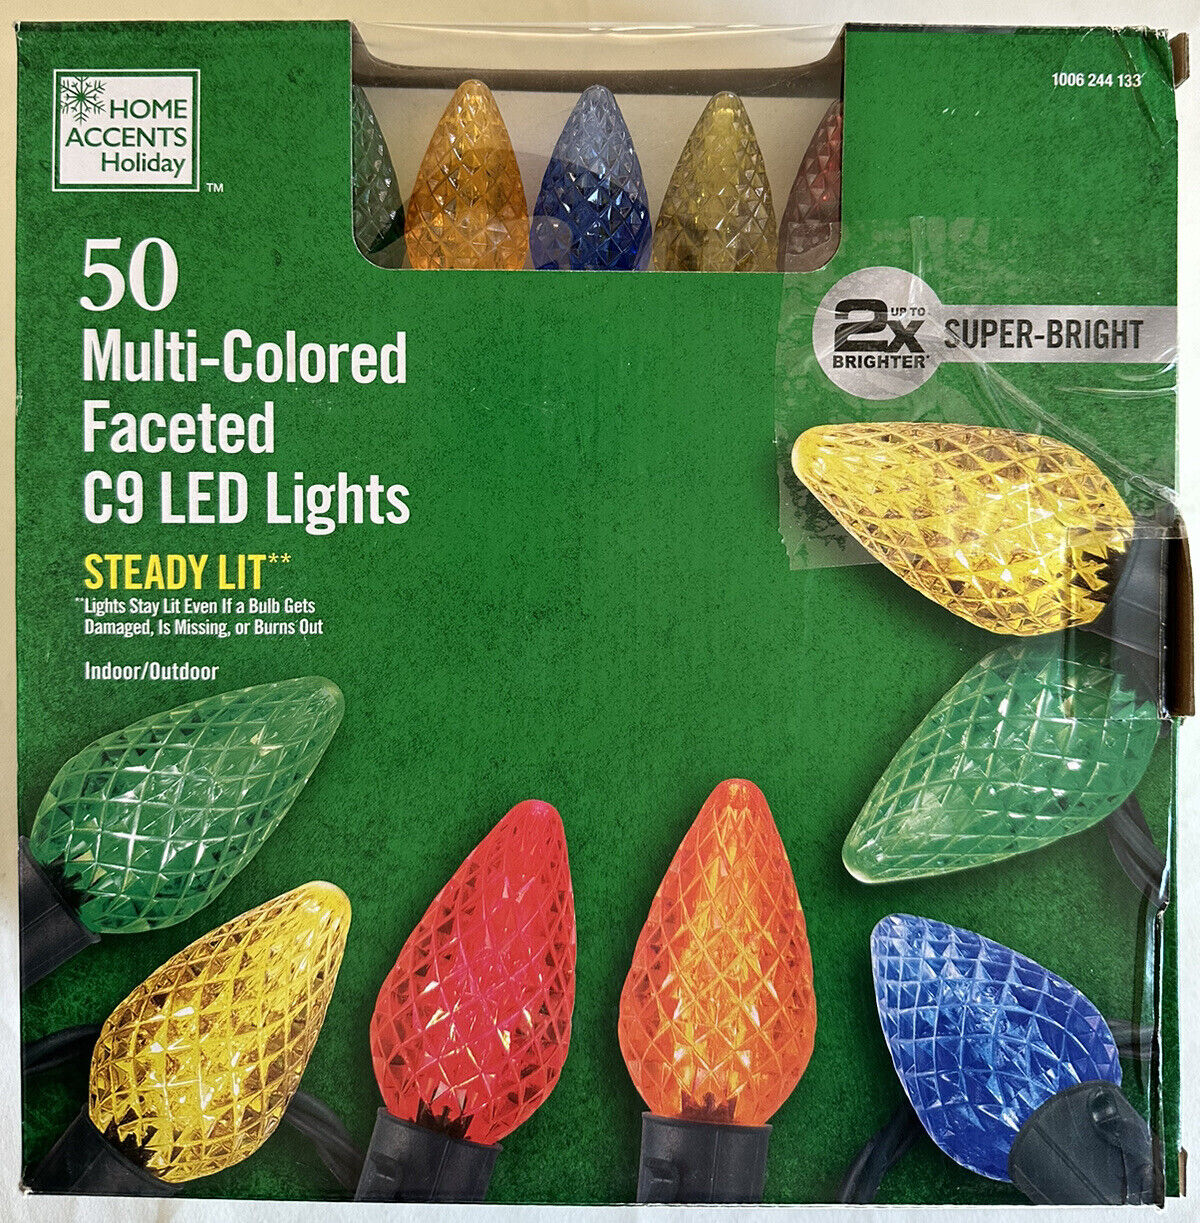 Home Accents Holiday 50 Multi-Colored Faceted C9 LED Lights - Open Box